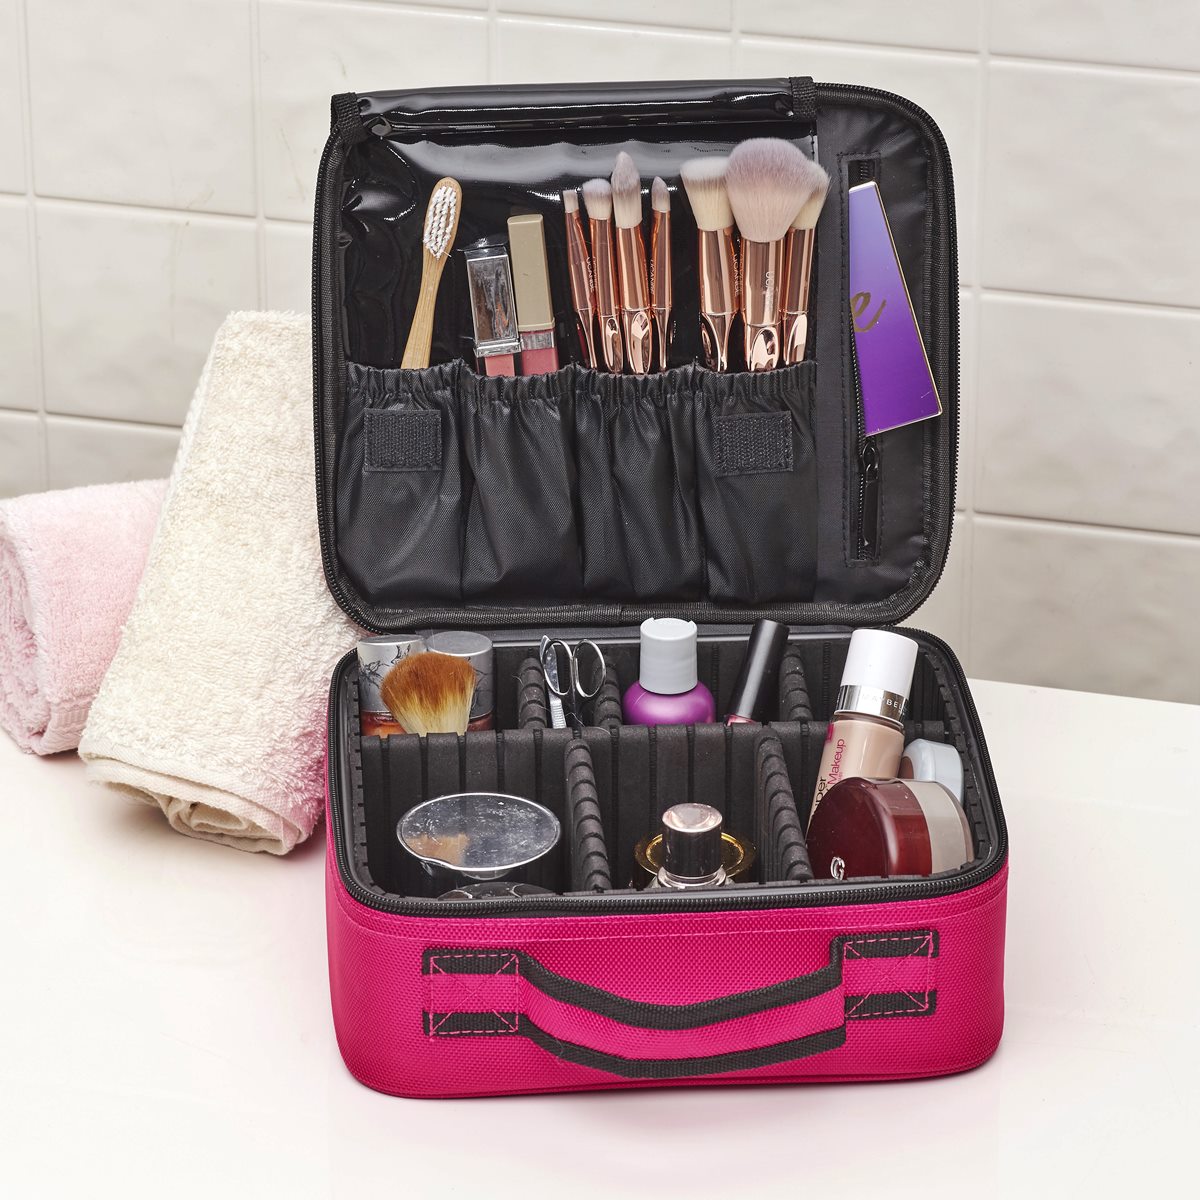 Travel Cosmetic Case Review: The Perfect Organizer for On-the-Go Beauty